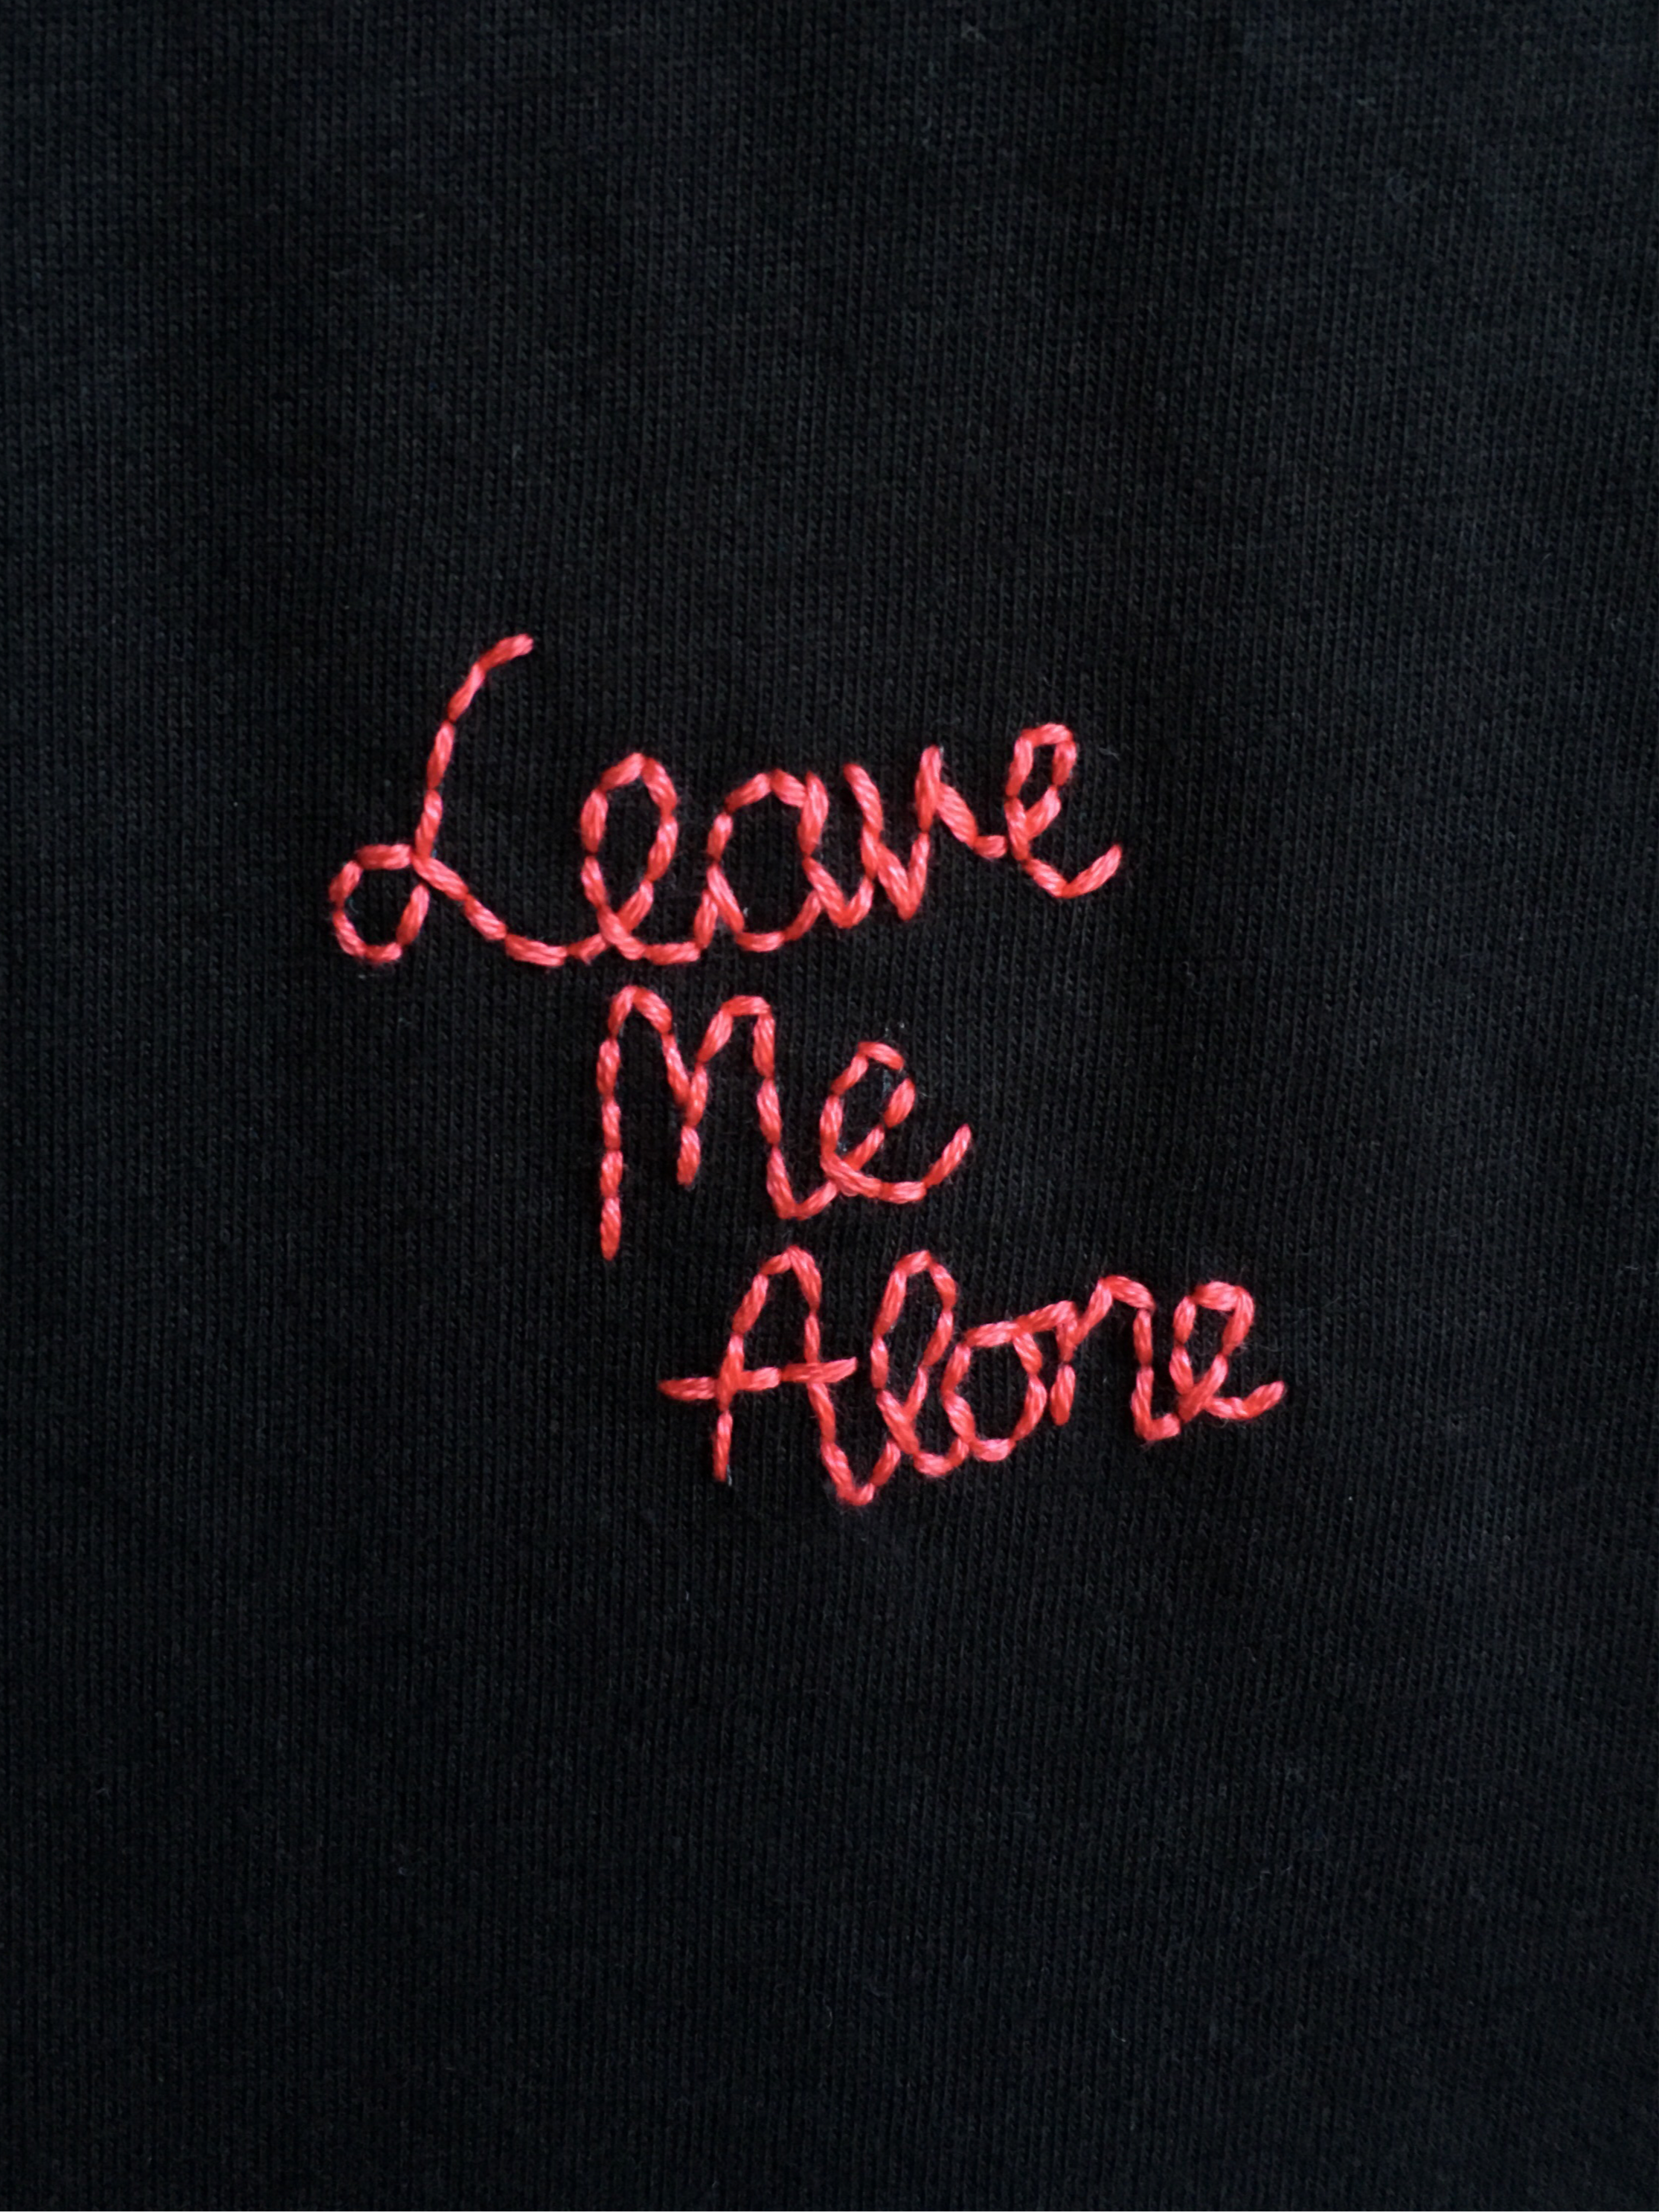 LEAVE ME ALONE - T SHIRT